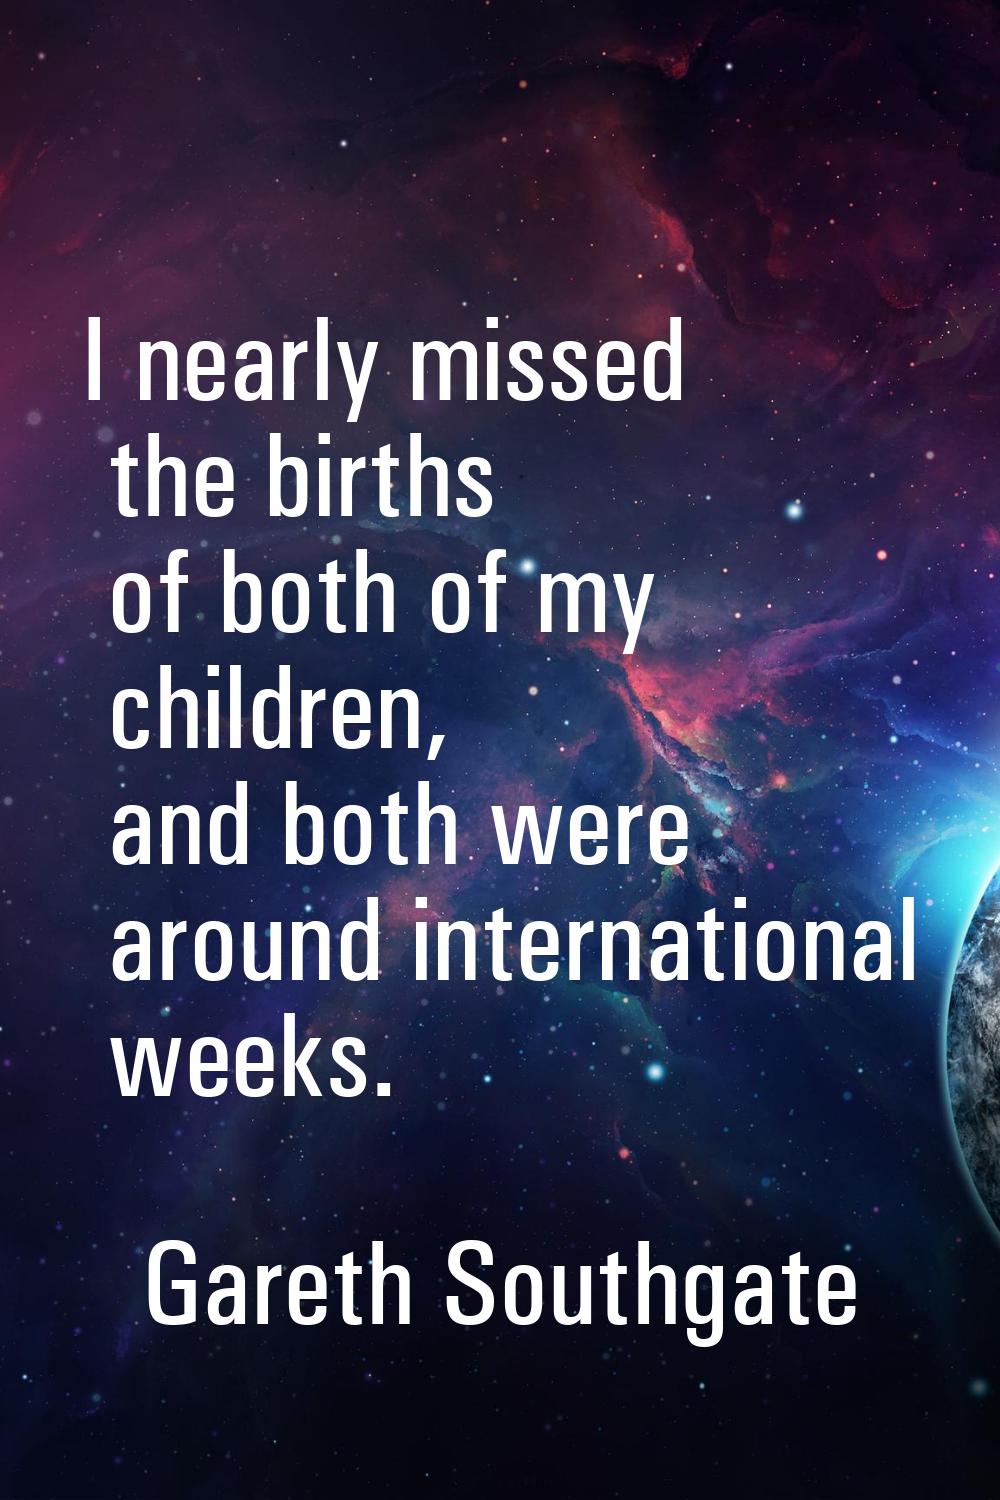 I nearly missed the births of both of my children, and both were around international weeks.